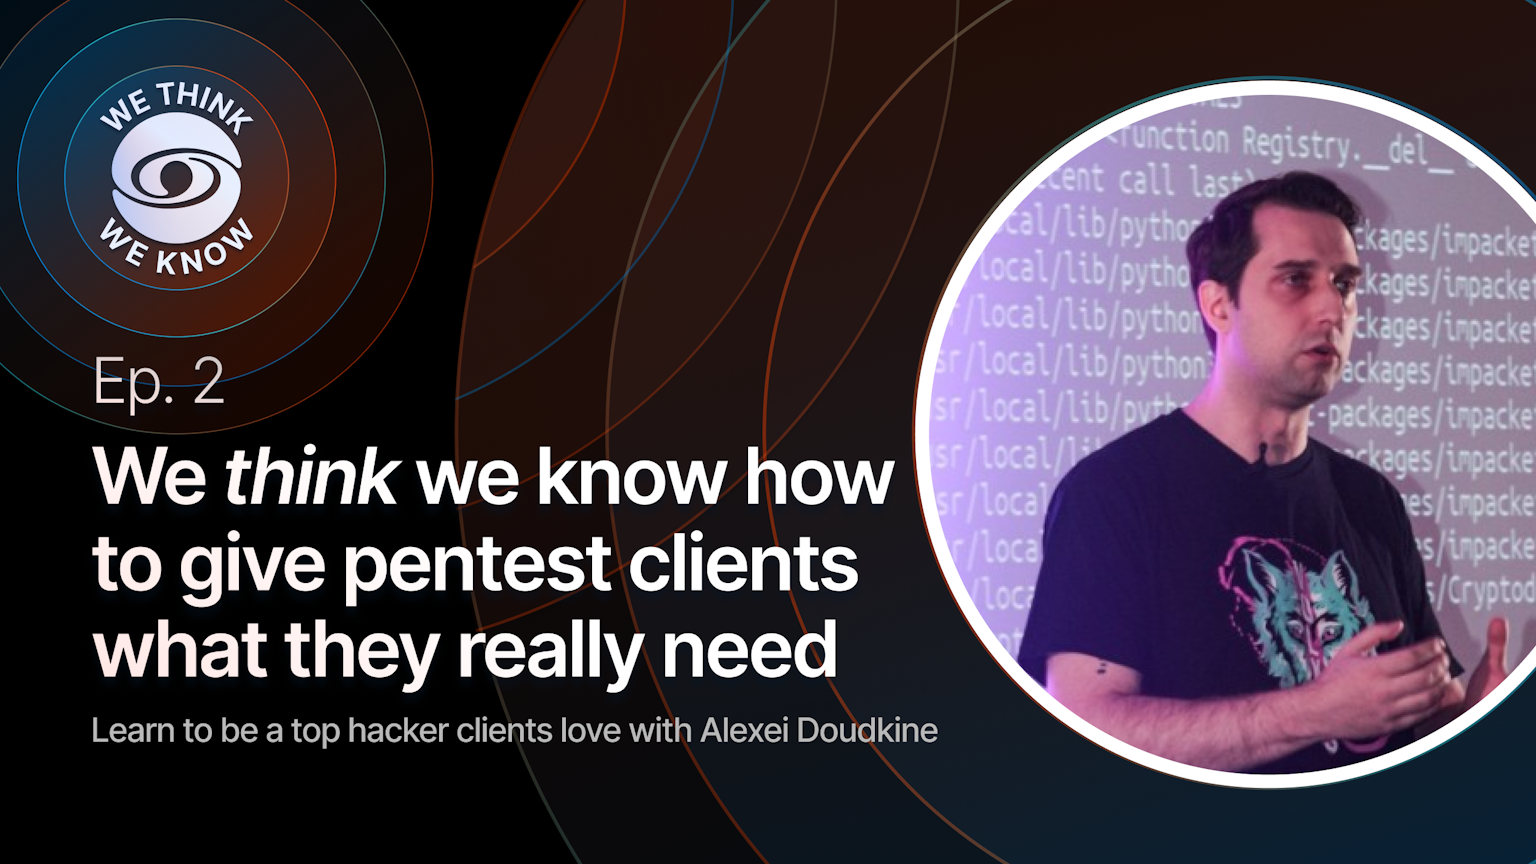 We think we know how to give pentest clients what they really need